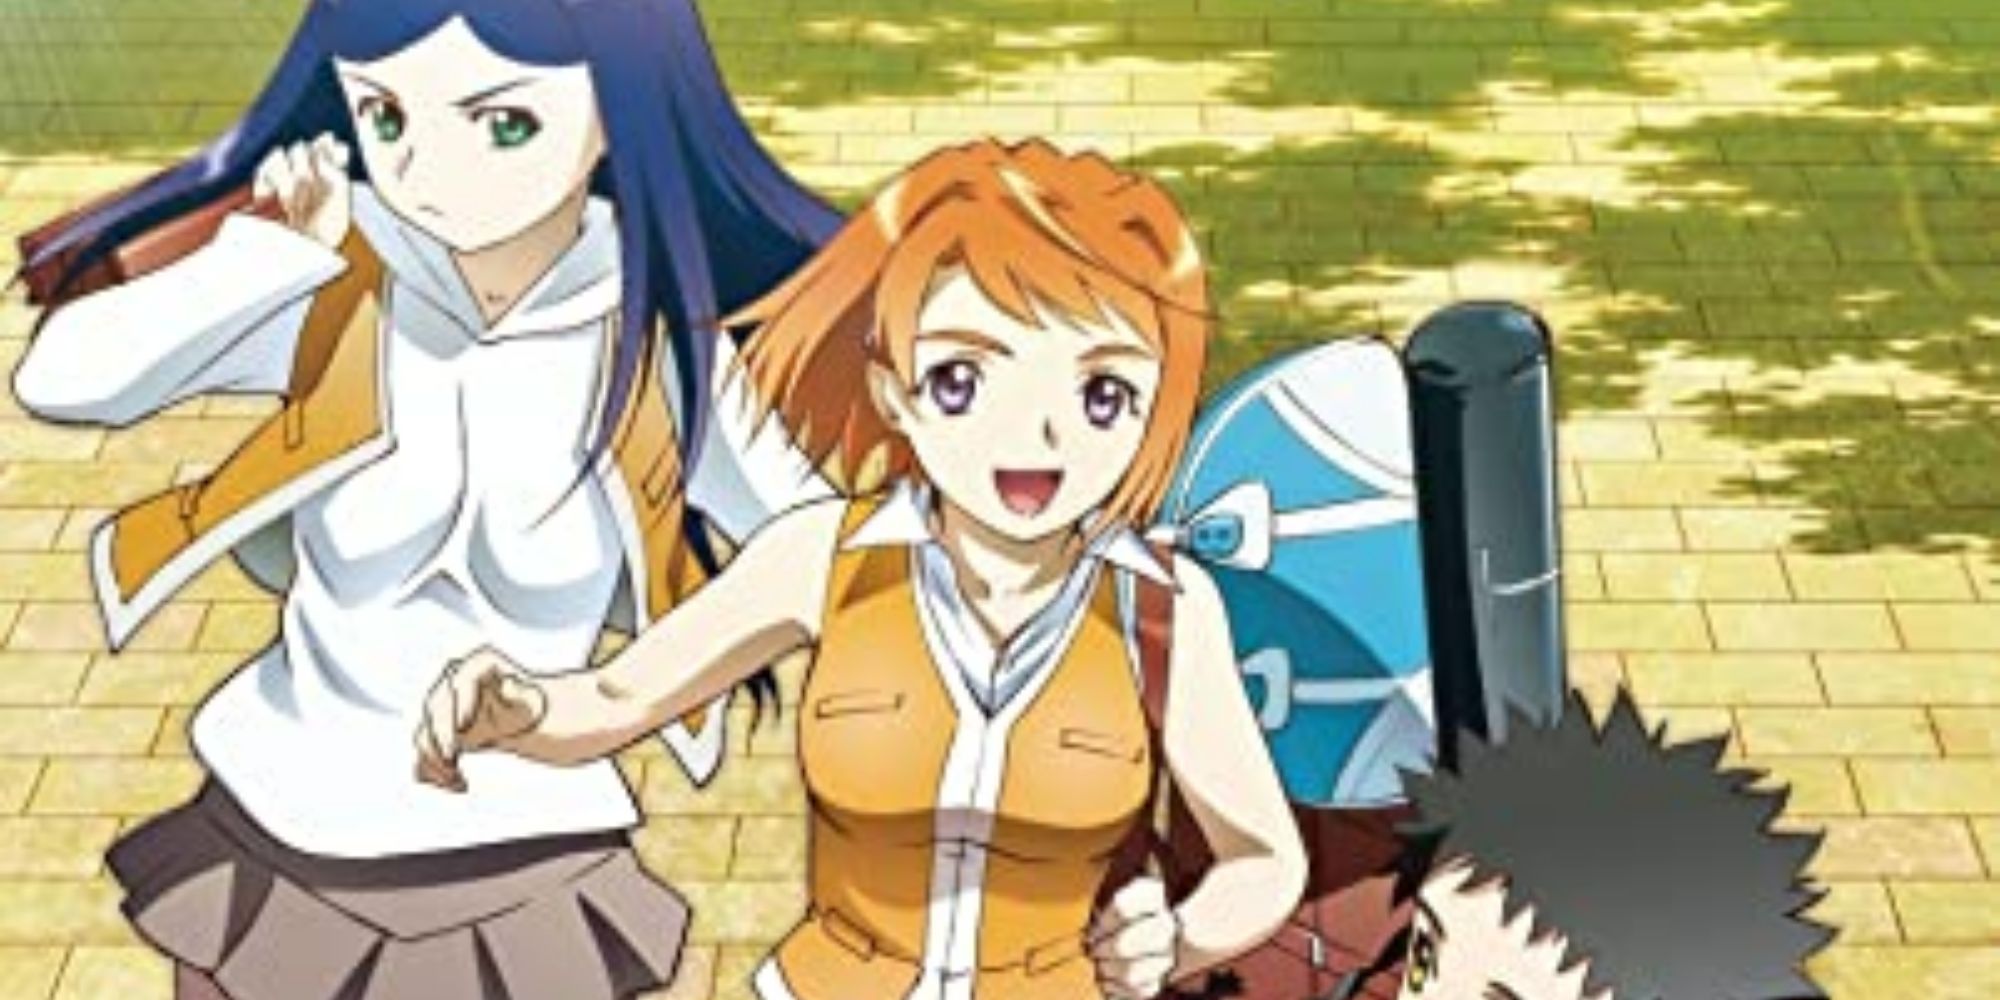 The three lead characters from Mai-Hime